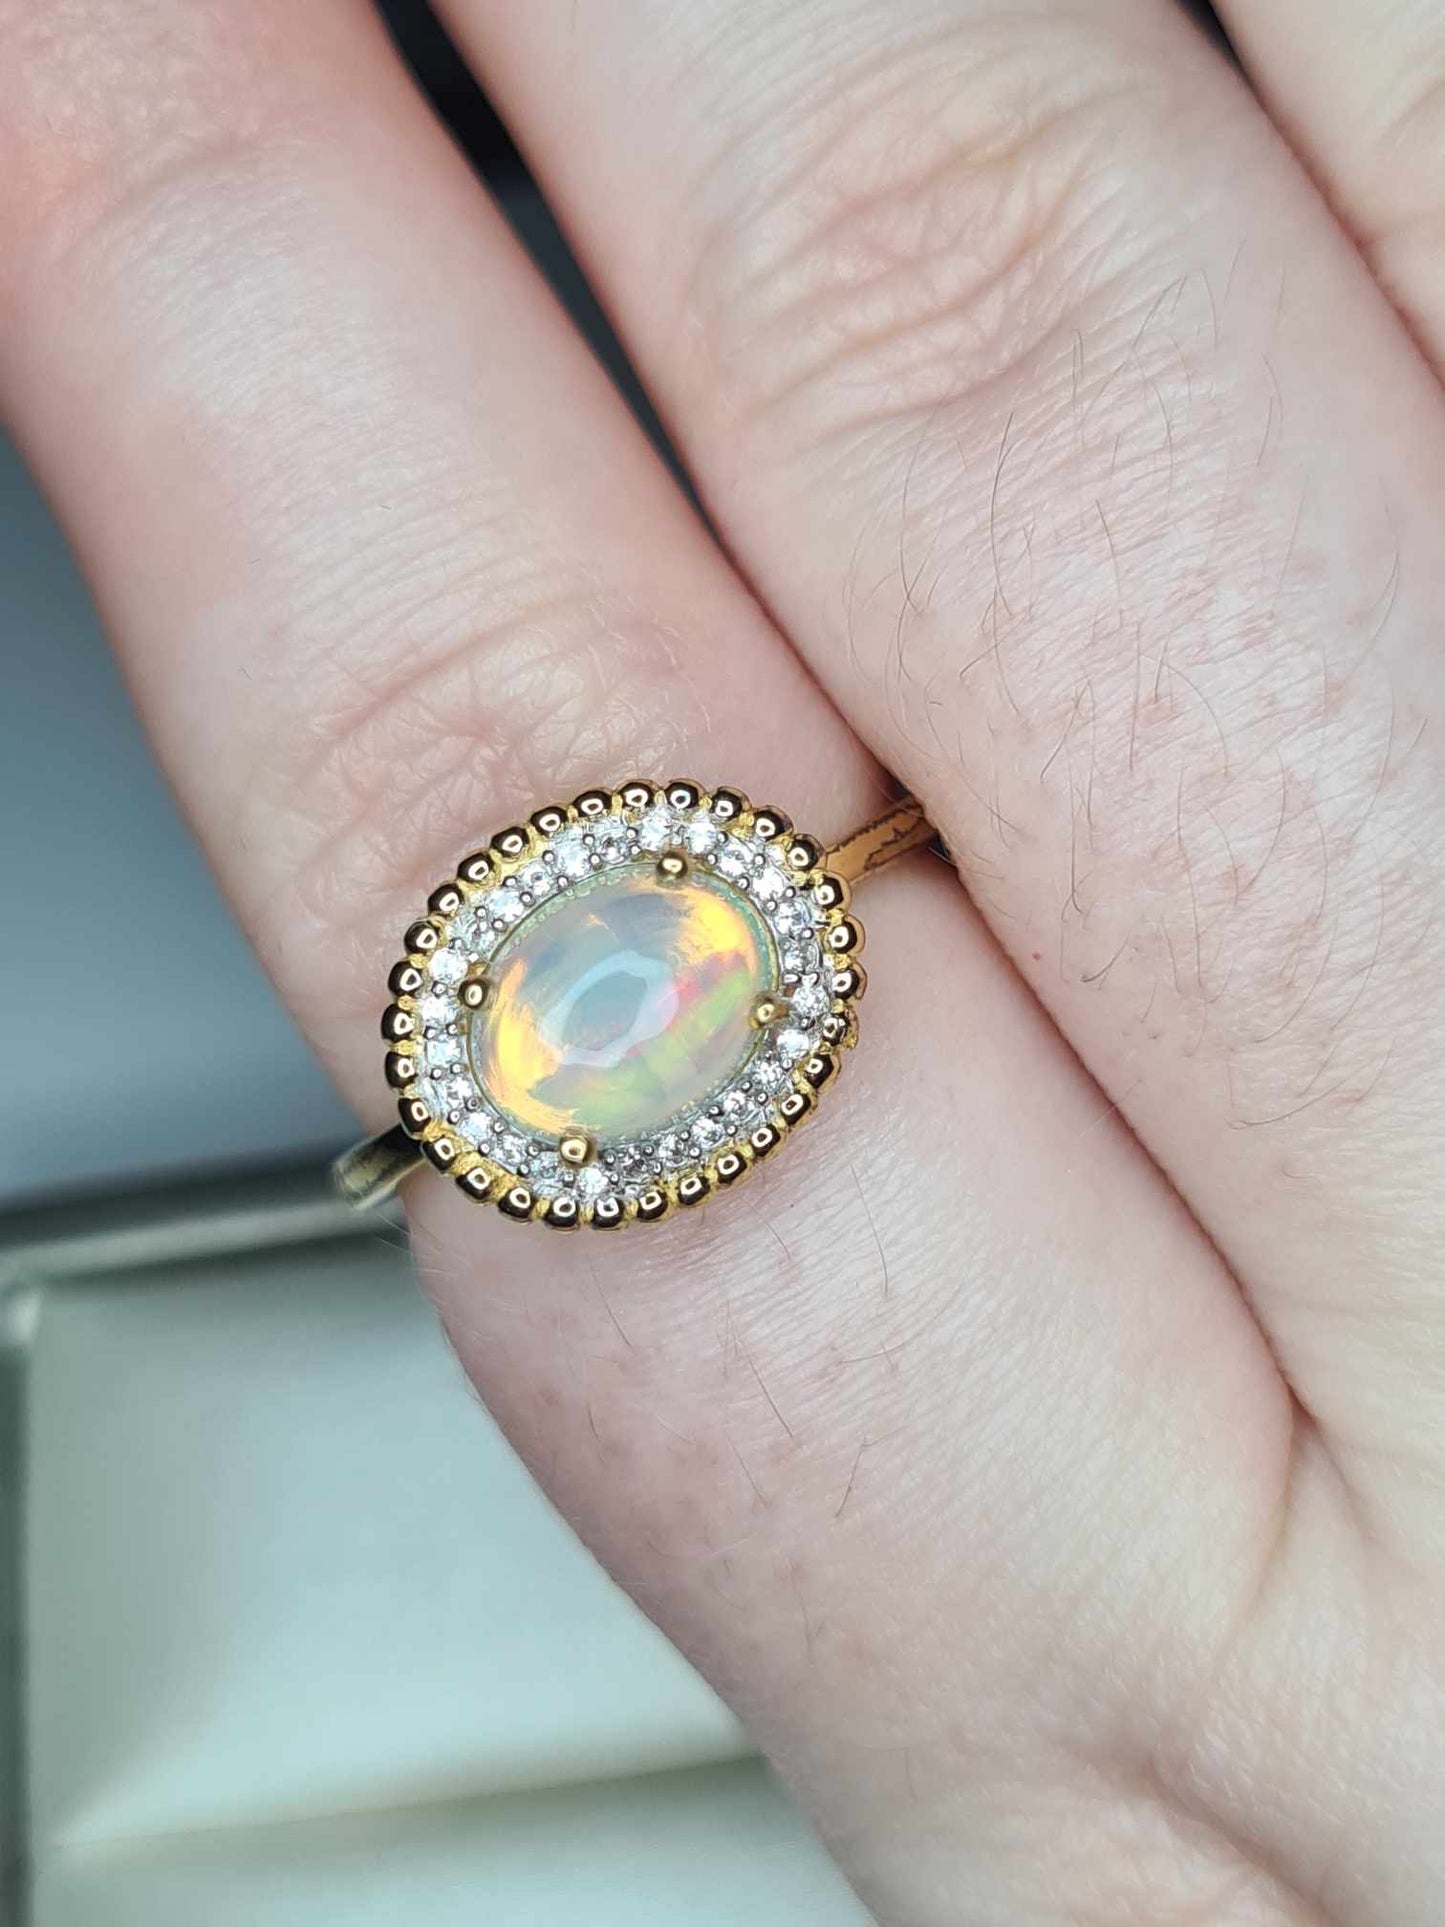 1.27ct Ethiopian Welo Opal & Natural Zircon Ring in 18K Gold Overlay 925 Sterling Silver SIZES L,T